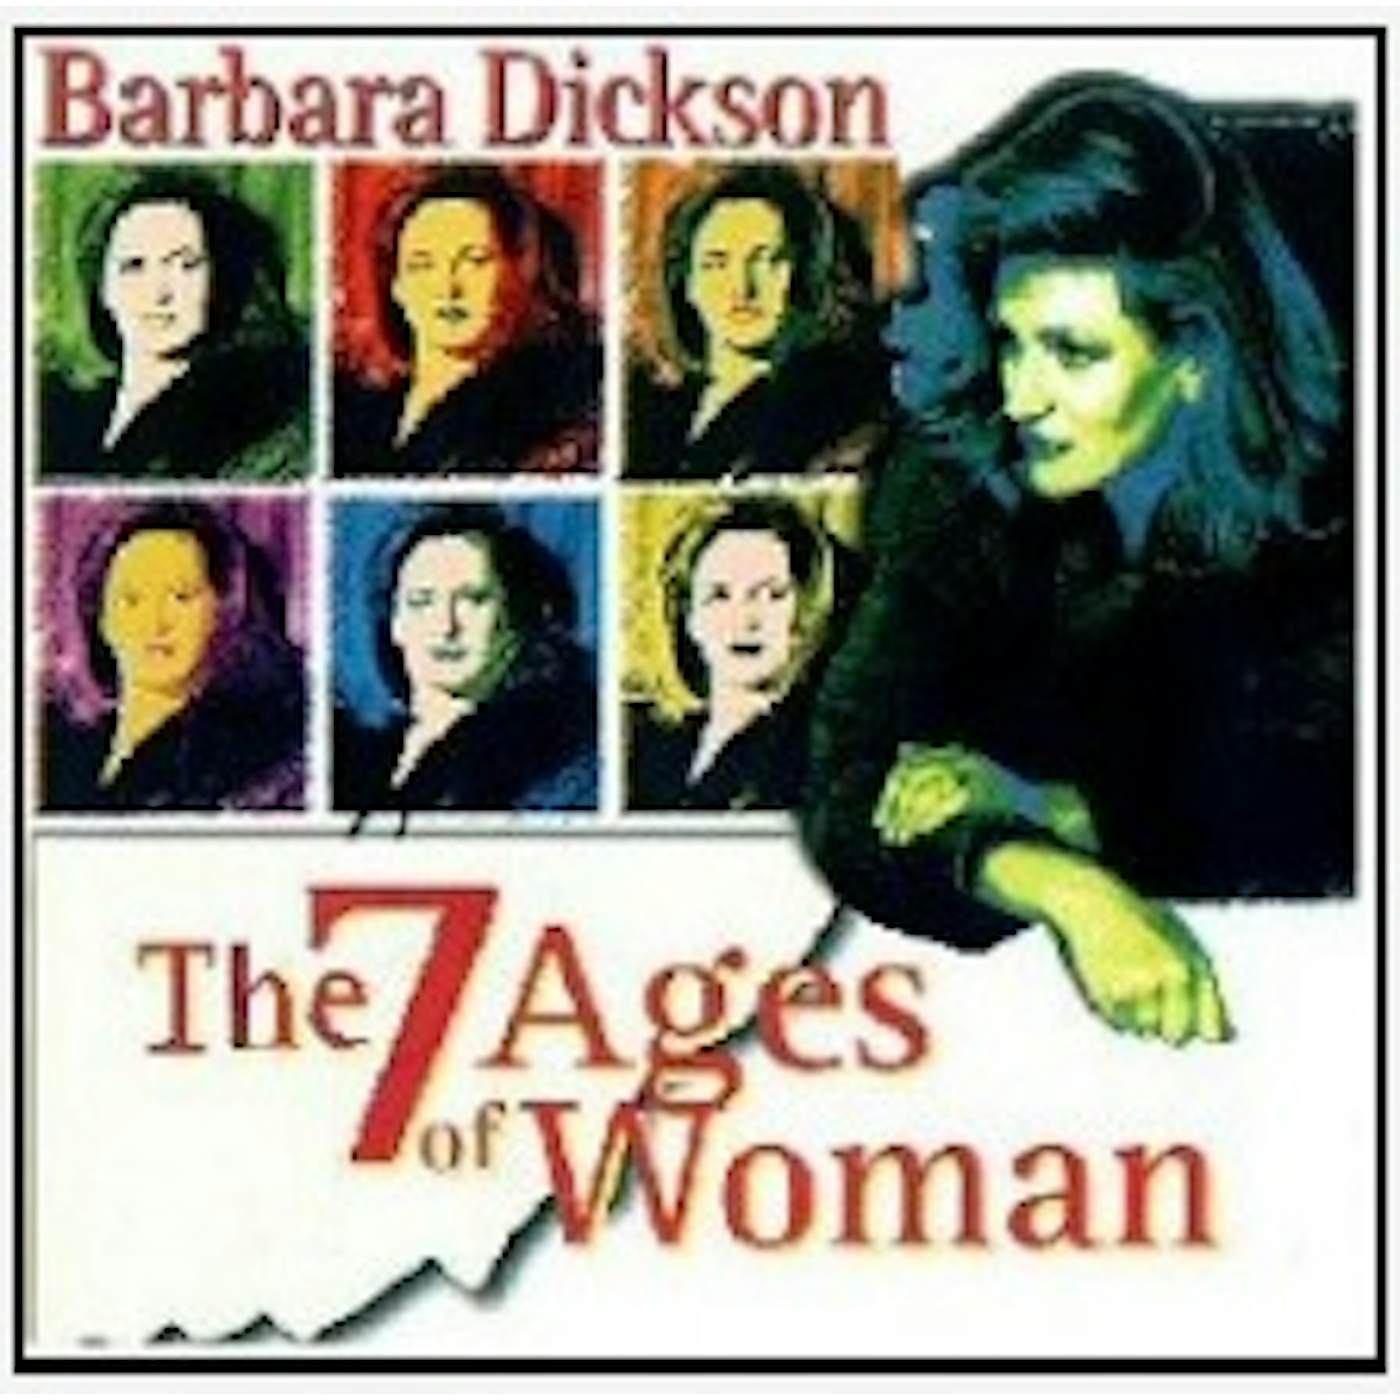 Barbara Dickson THE 7 AGES OF WOMAN CD